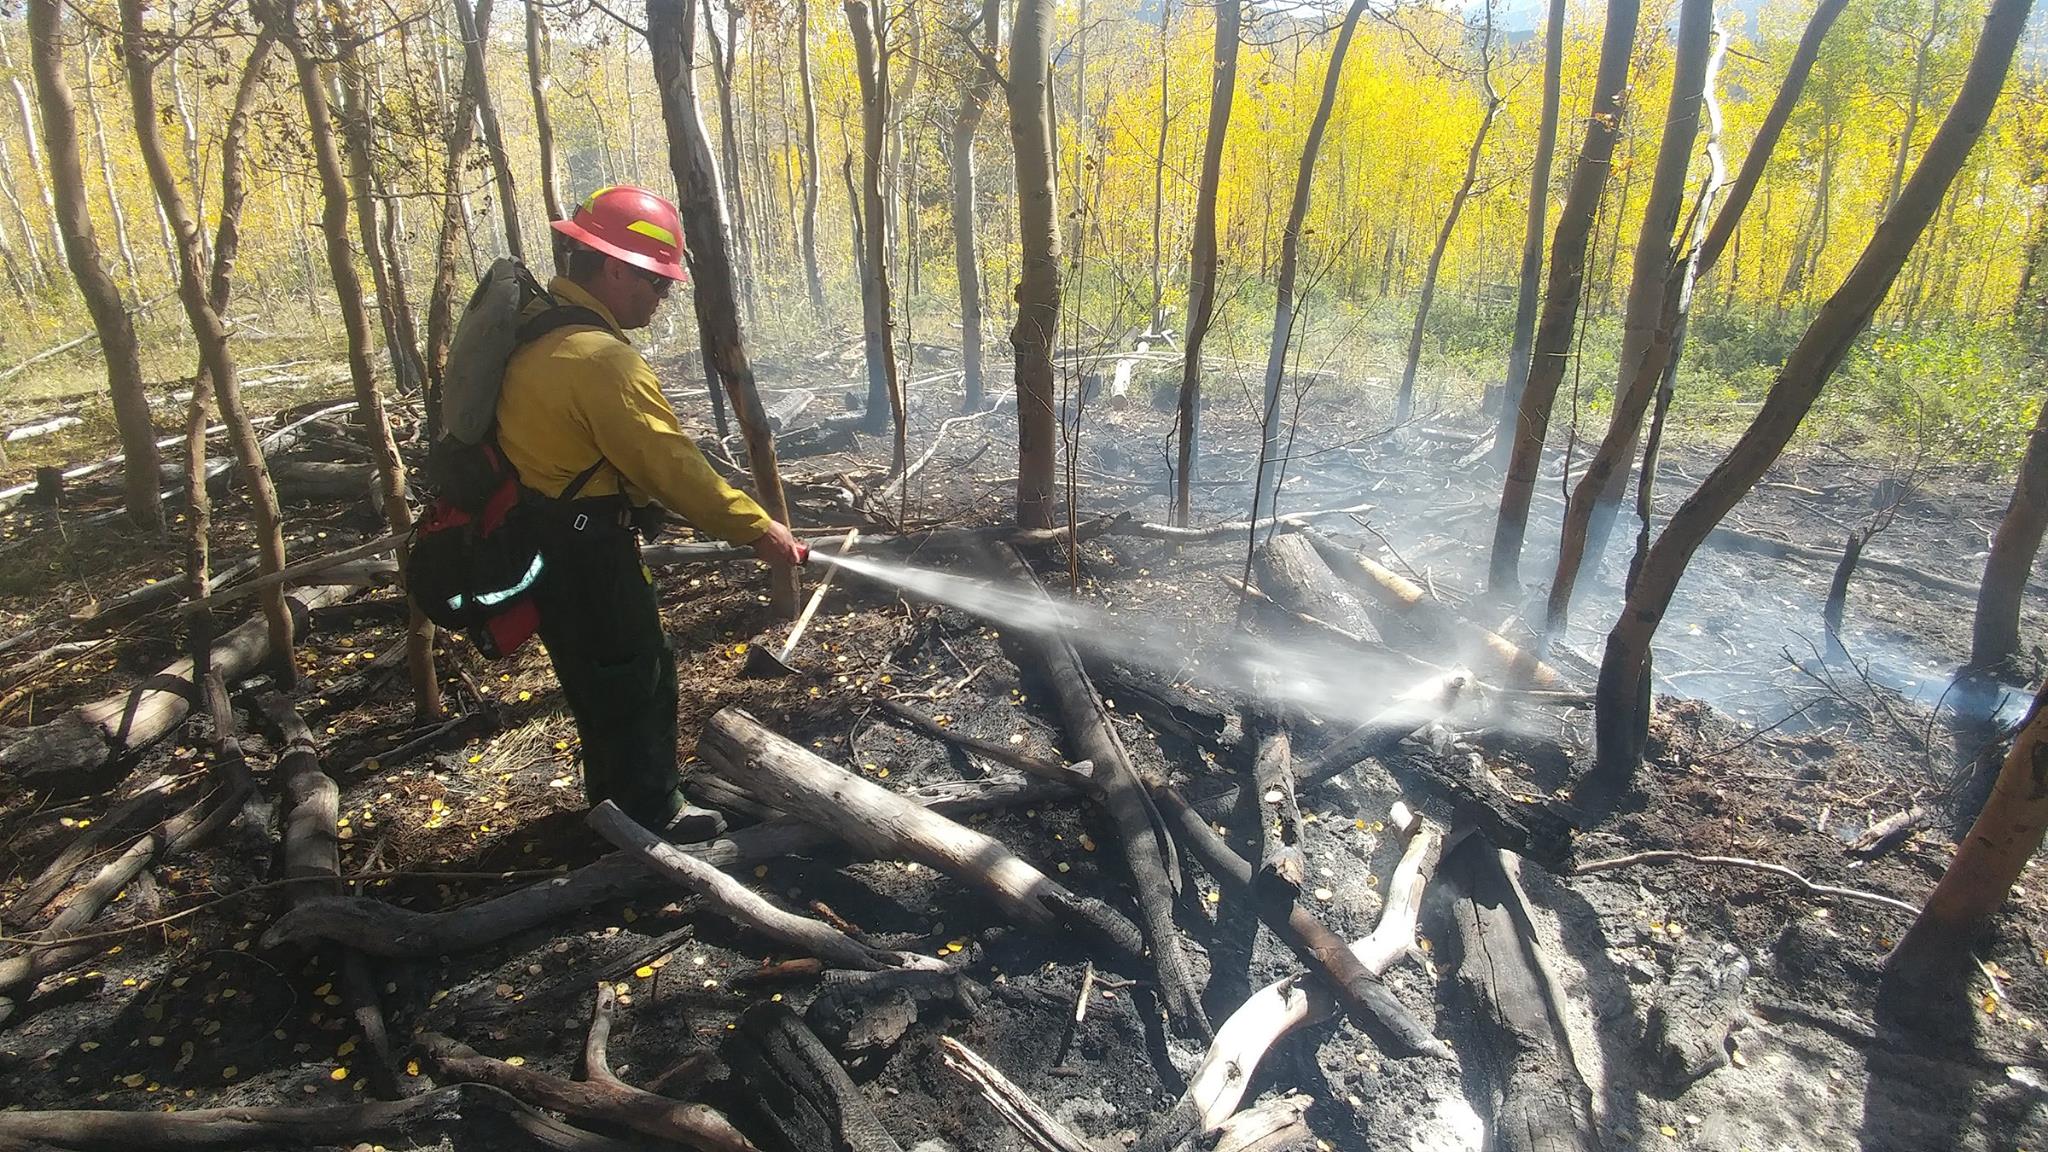 Firefighters hiked up Tenderfoot Mountain to hose down hotspots. Photo courtesy: Lake Dillon Fire and Rescue.